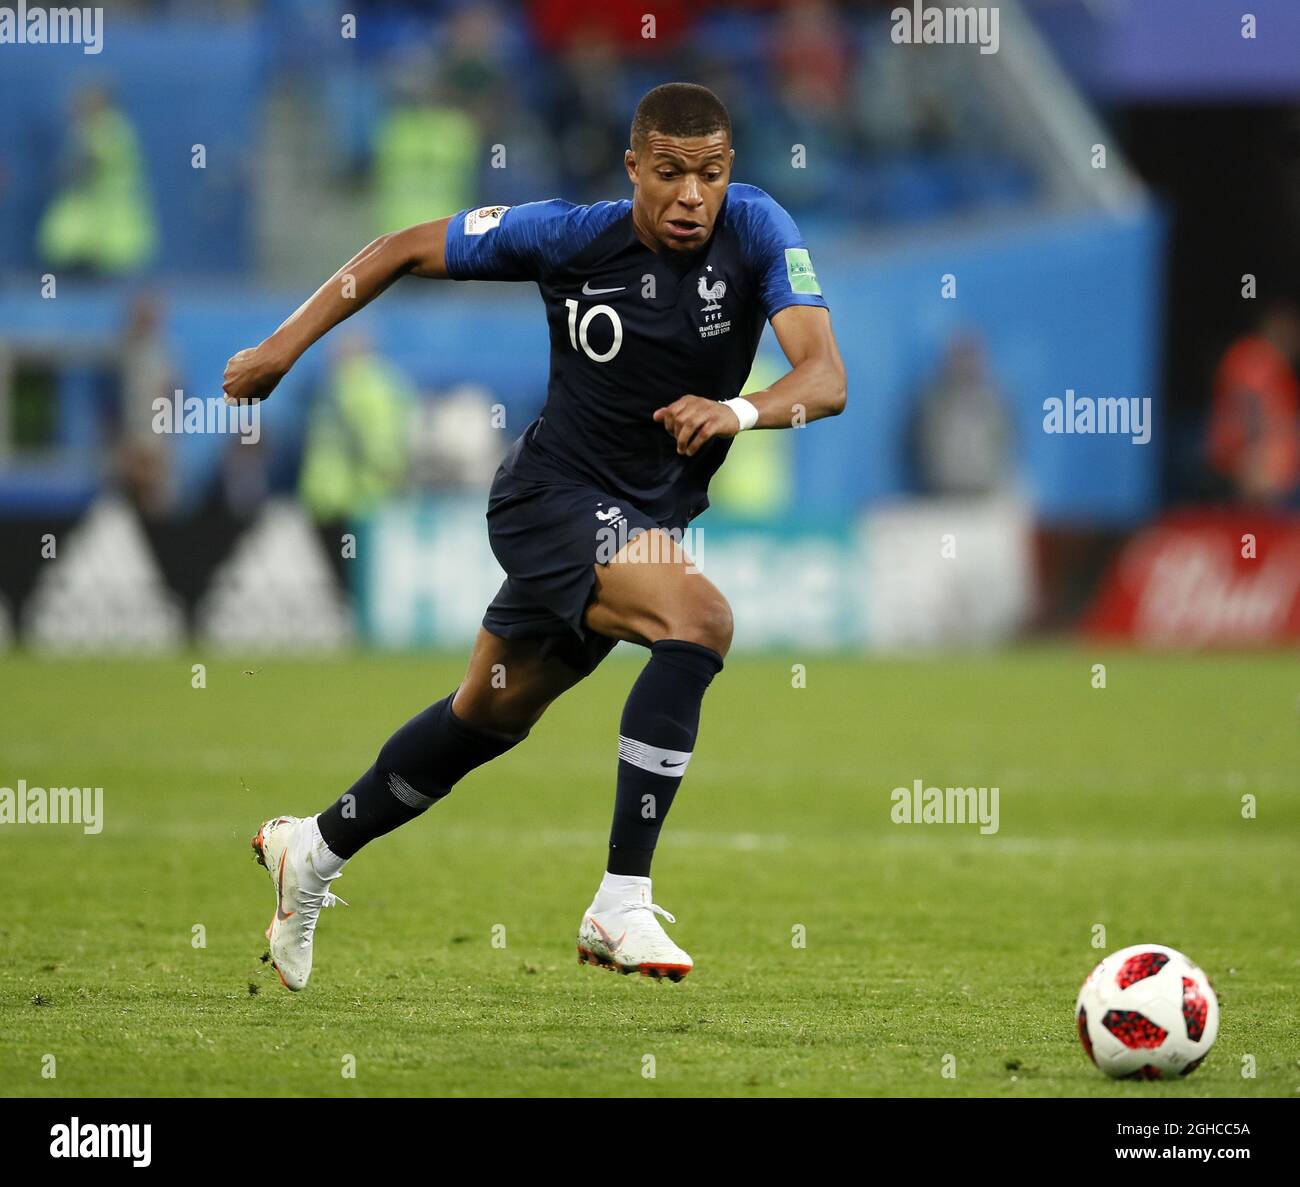 France's Kylian Mbappe in action during the FIFA World Cup 2018 Semi Final match at the St Petersburg Stadium, St Petersburg. Picture date 10th July 2018. Picture credit should read: David Klein/Sportimage via PA Images Stock Photo